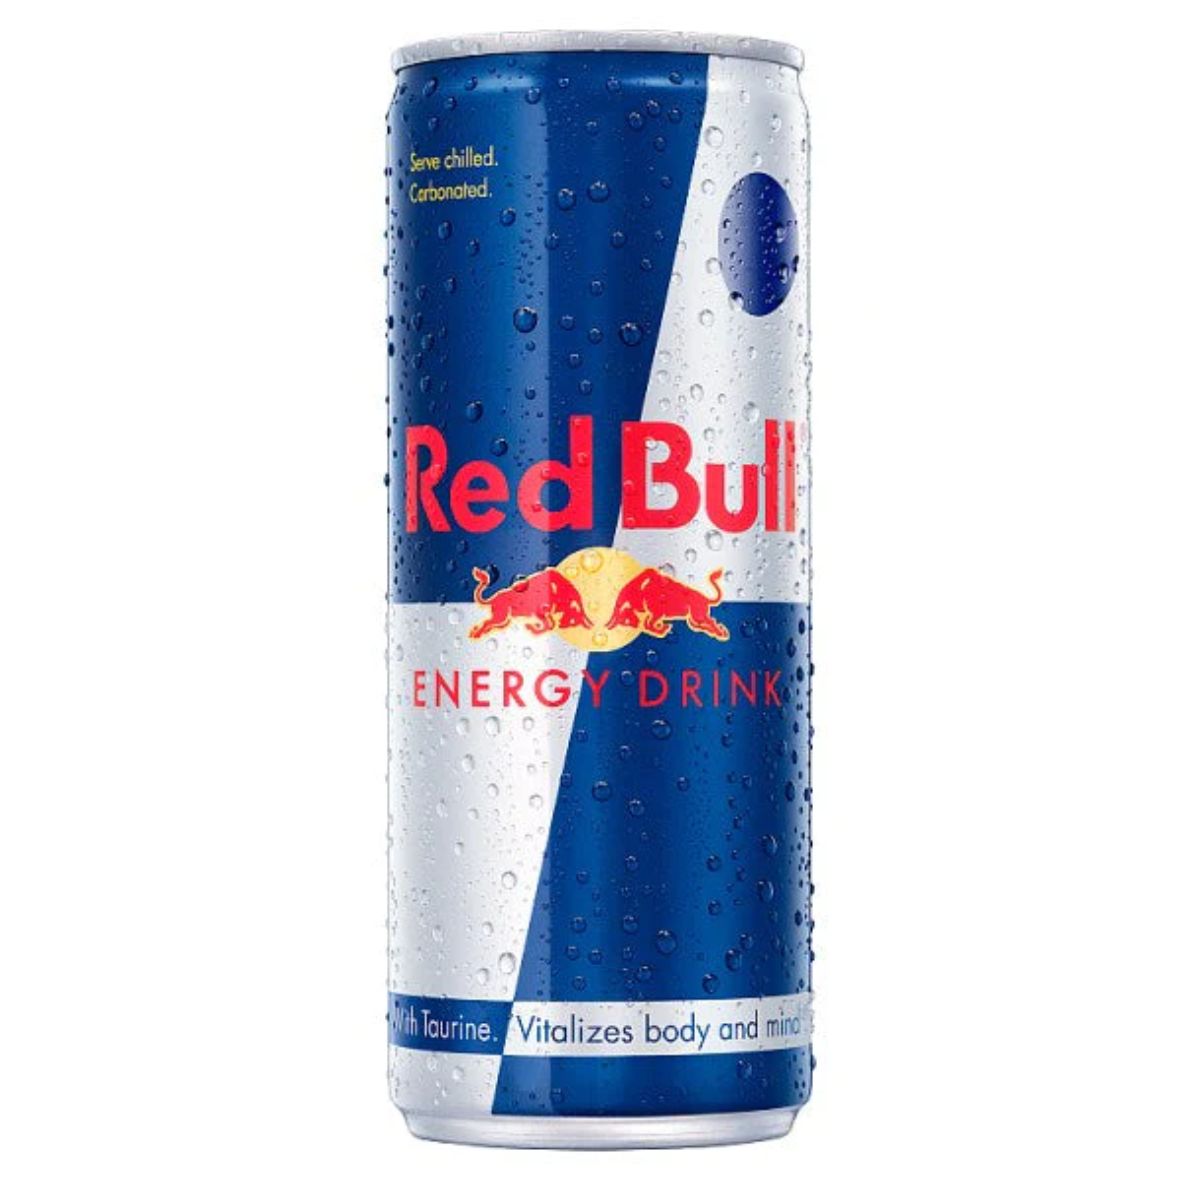 Red Bull - Energy Drink - 250ml on a white background.